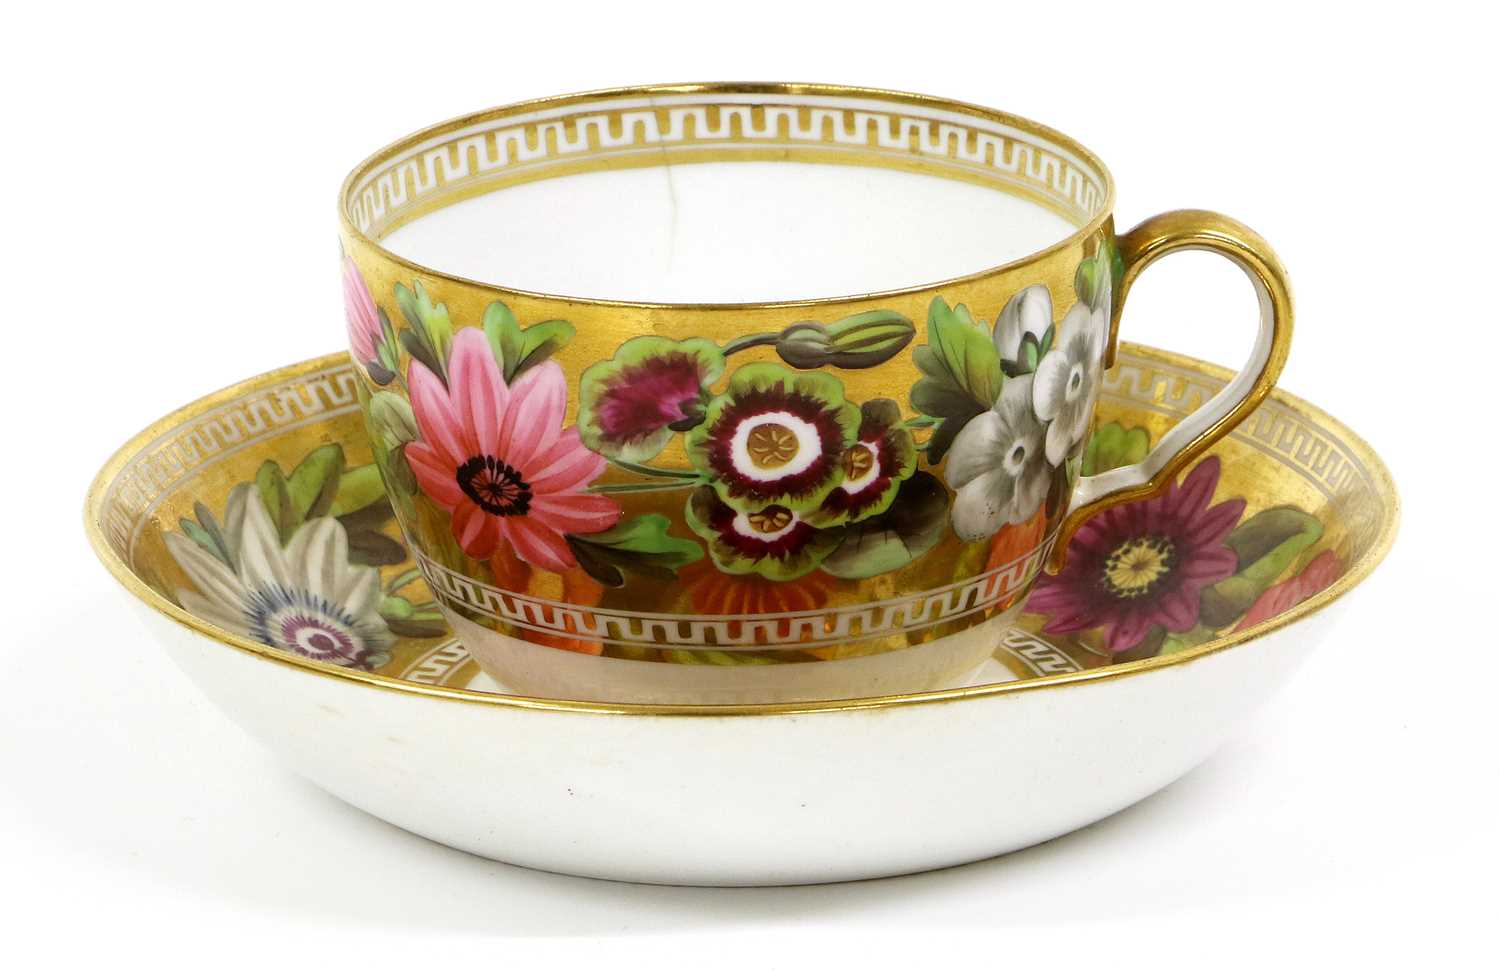 A Spode Teacup and Saucer, circa 1810, of bute shape, gilt ground and painted with large flowers - Image 2 of 5